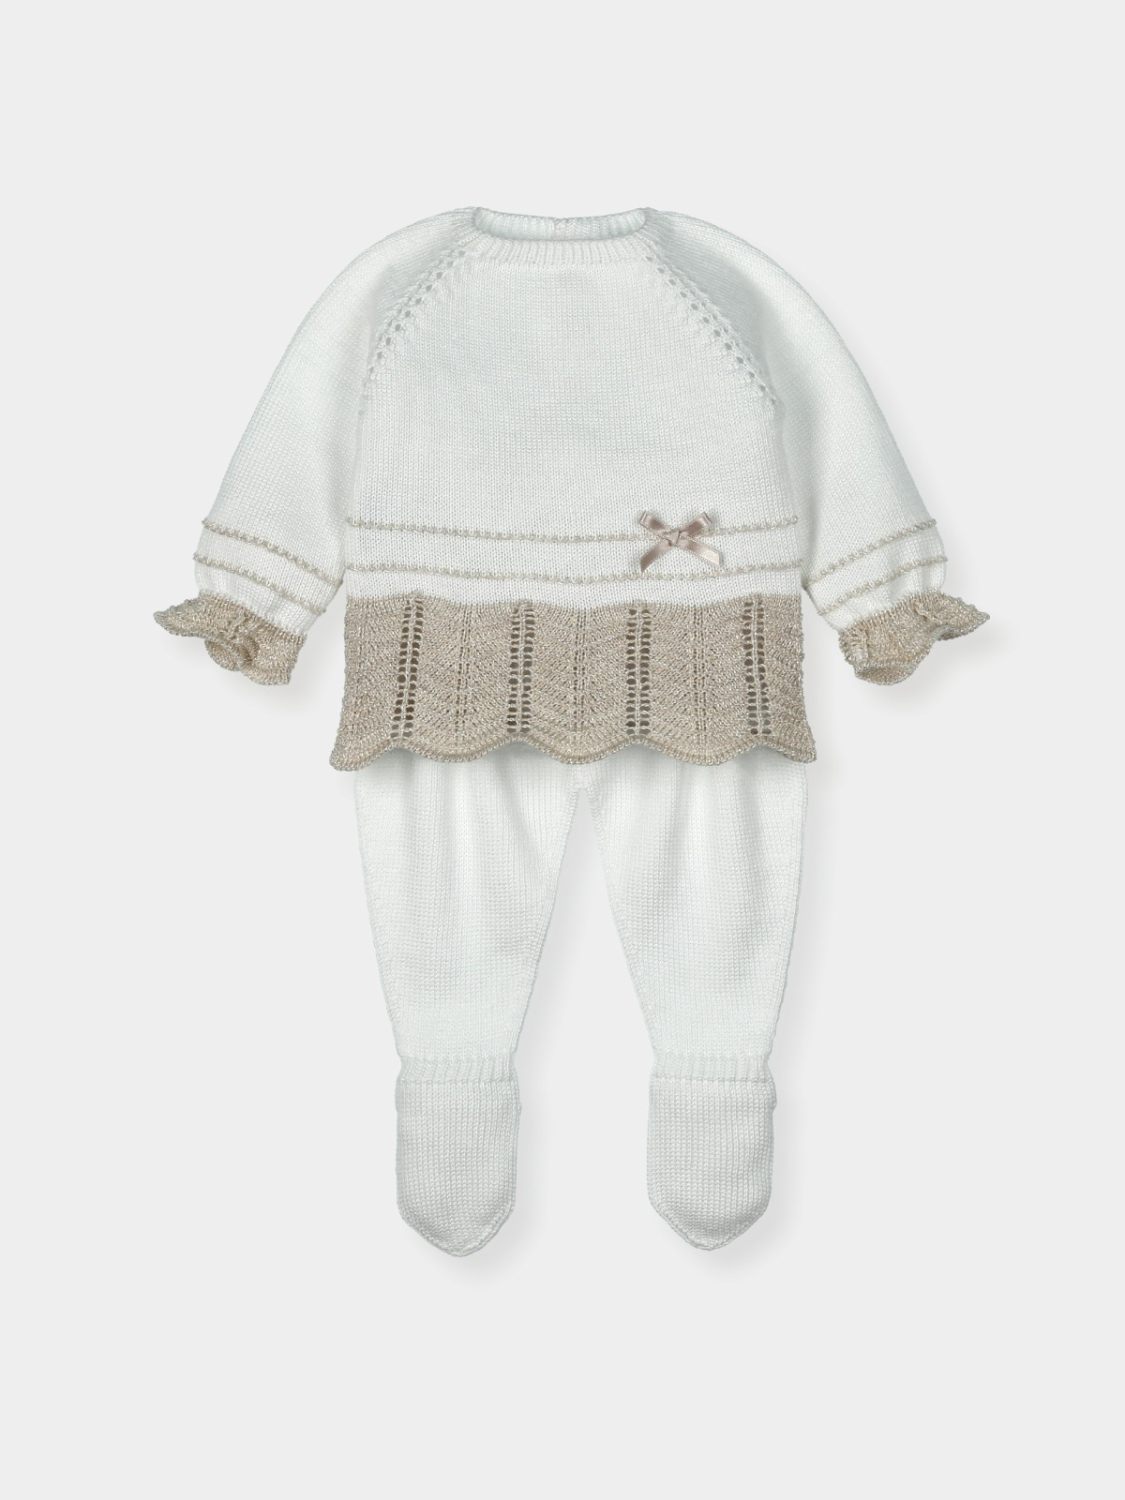 Sandy bow baby outfit